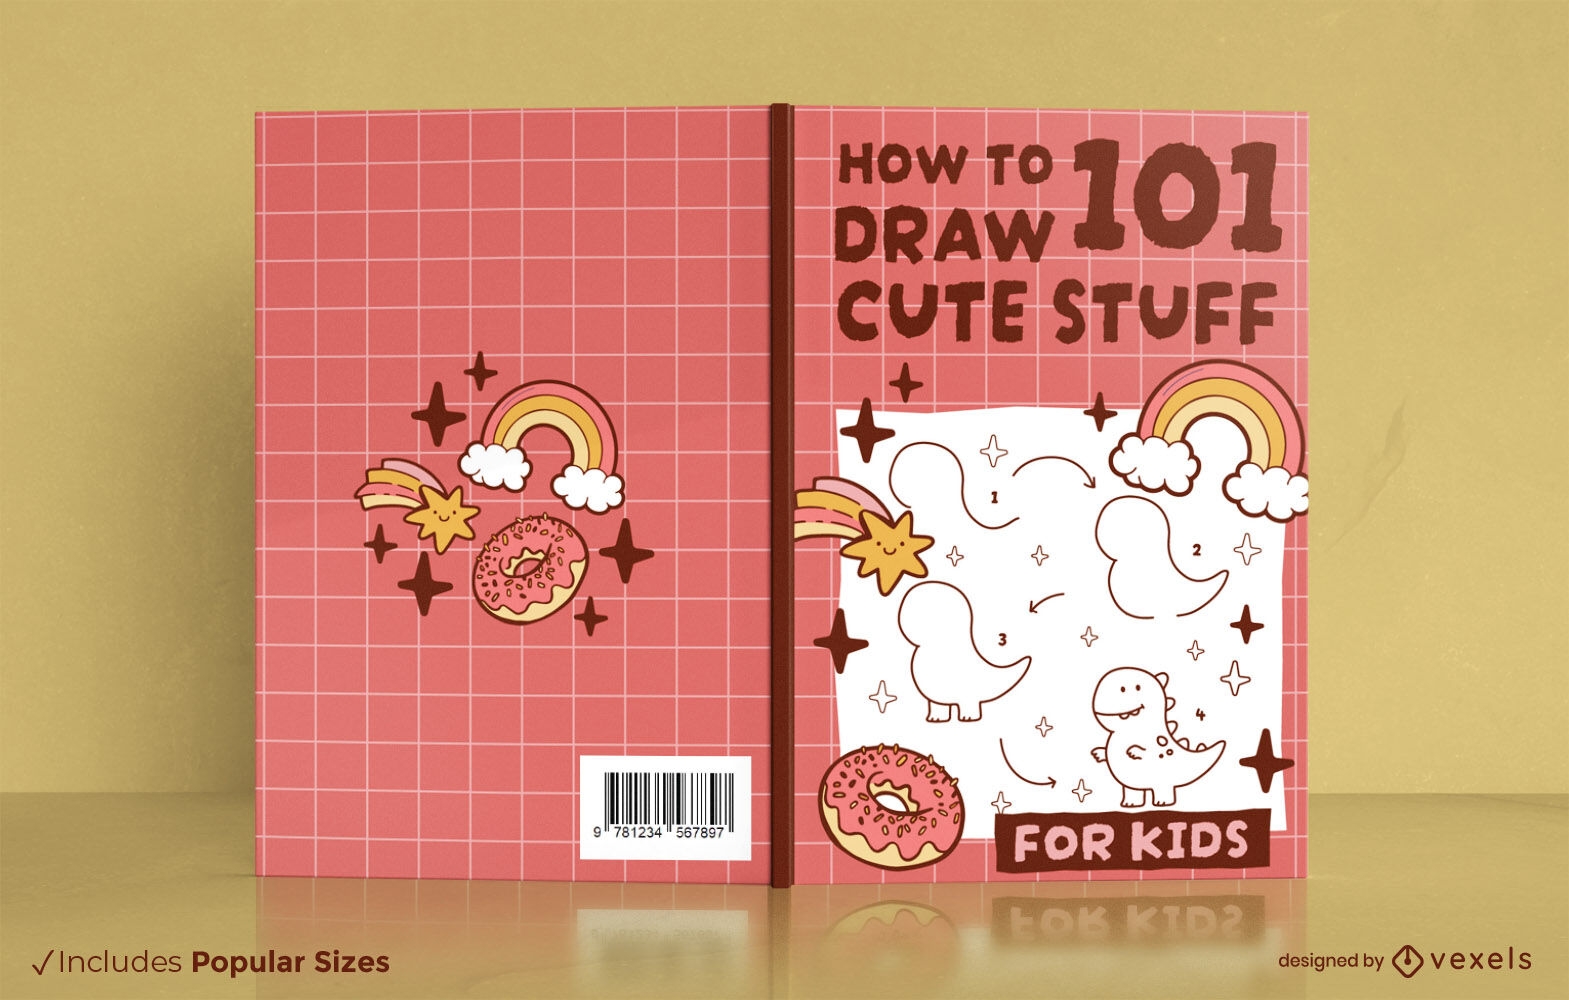 How to drawn dinosaurs book cover design